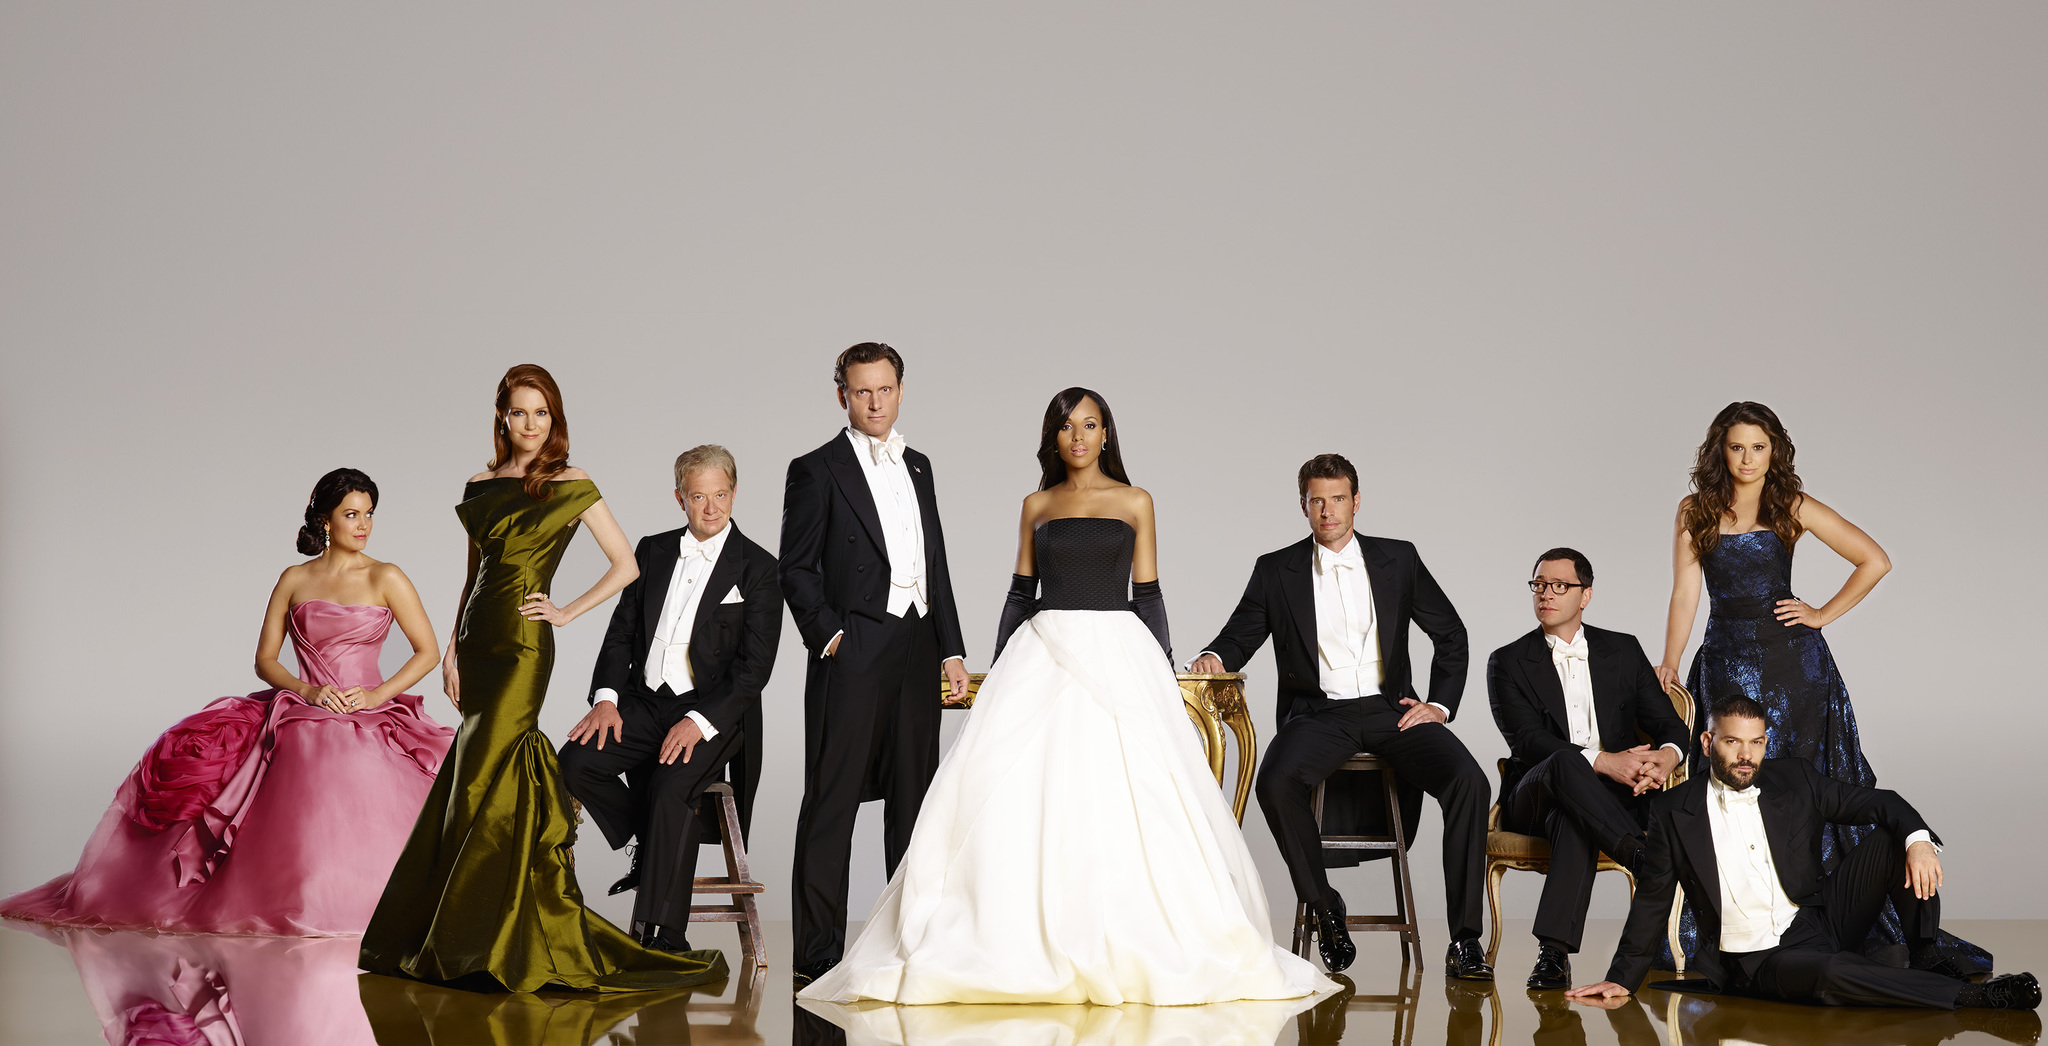 Still of Tony Goldwyn, Scott Foley, Joshua Malina, Jeff Perry, Kerry Washington, Bellamy Young, Guillermo Diaz, Darby Stanchfield and Katie Lowes in Scandal (2012)